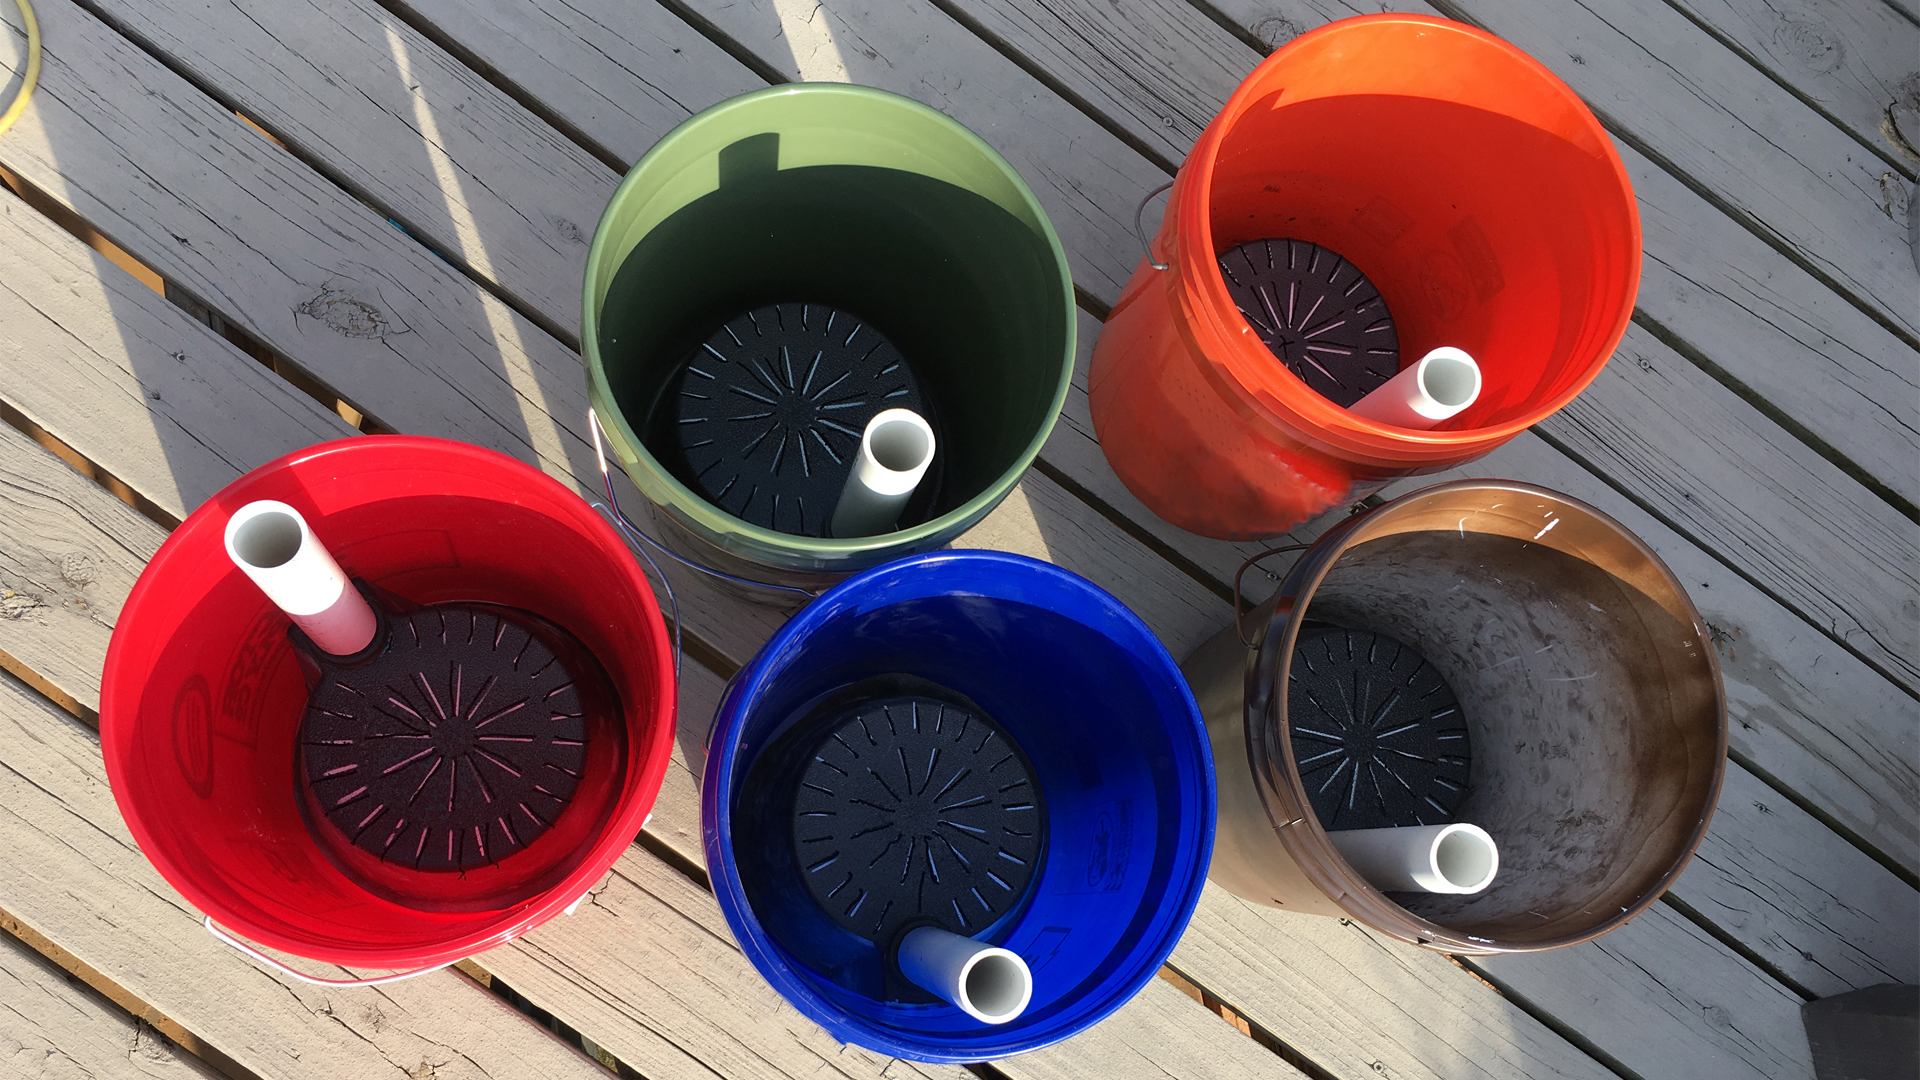 GroBucket inserts ready for planting.